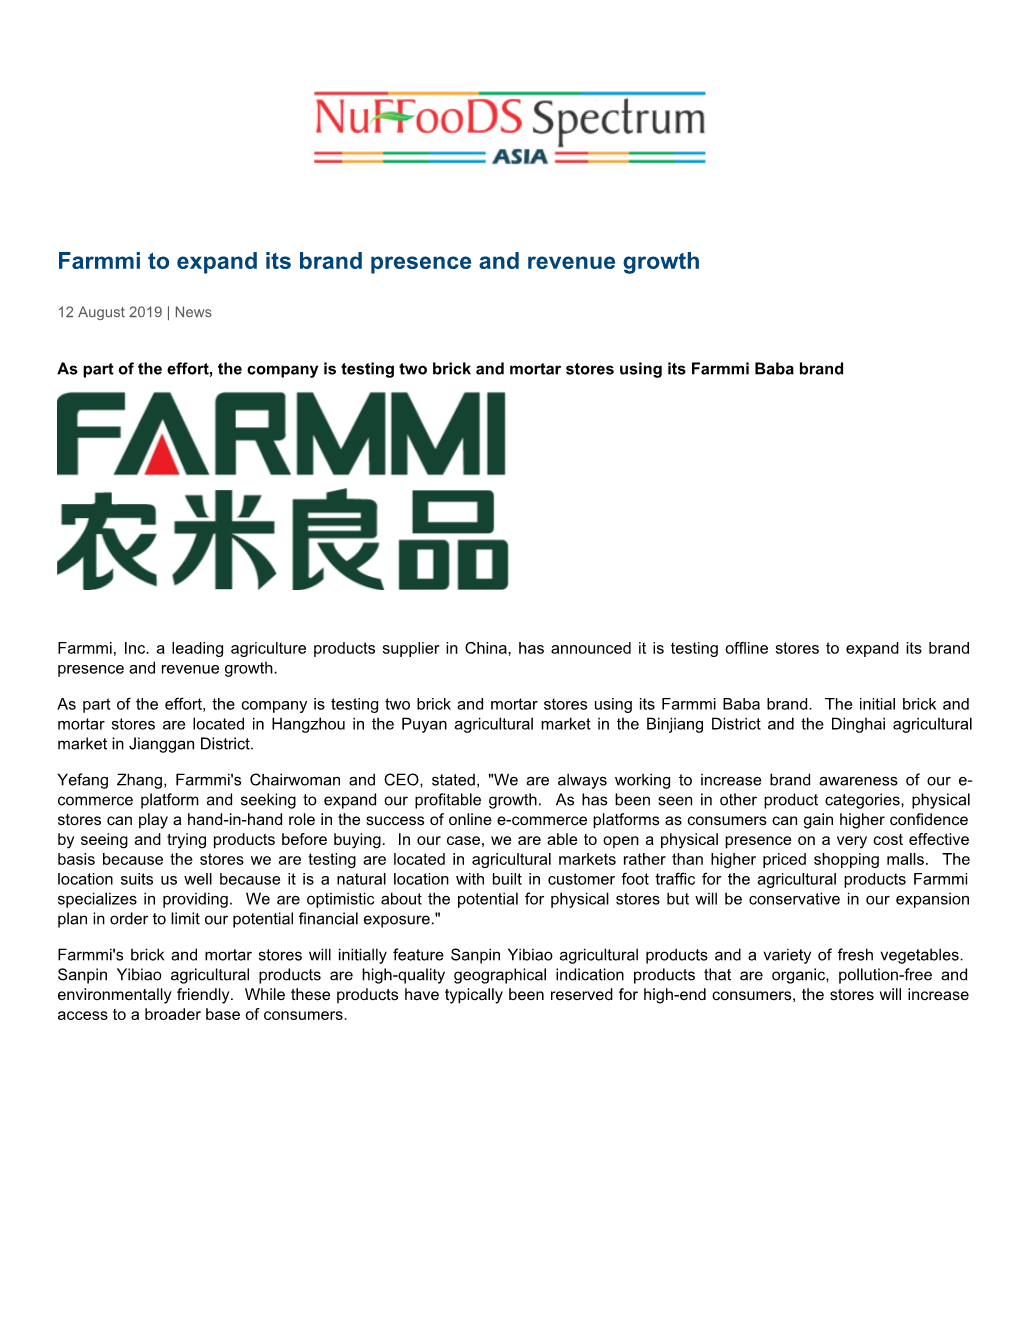 Farmmi to Expand Its Brand Presence and Revenue Growth